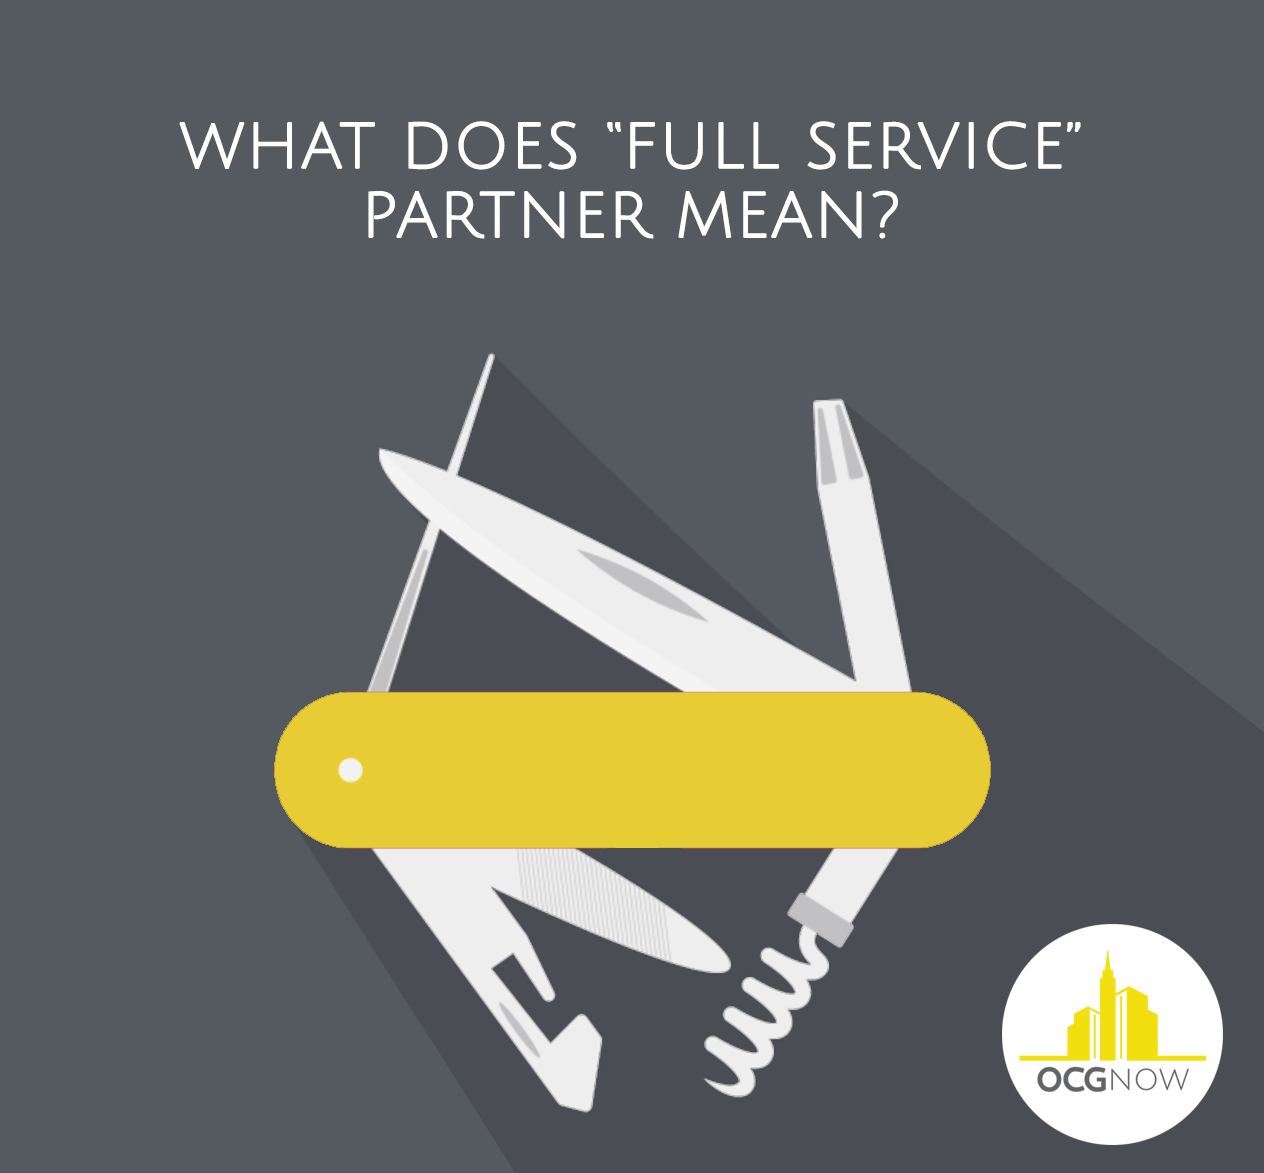 Swiss army knife symbolic of the full service partner help offered by OCGnow